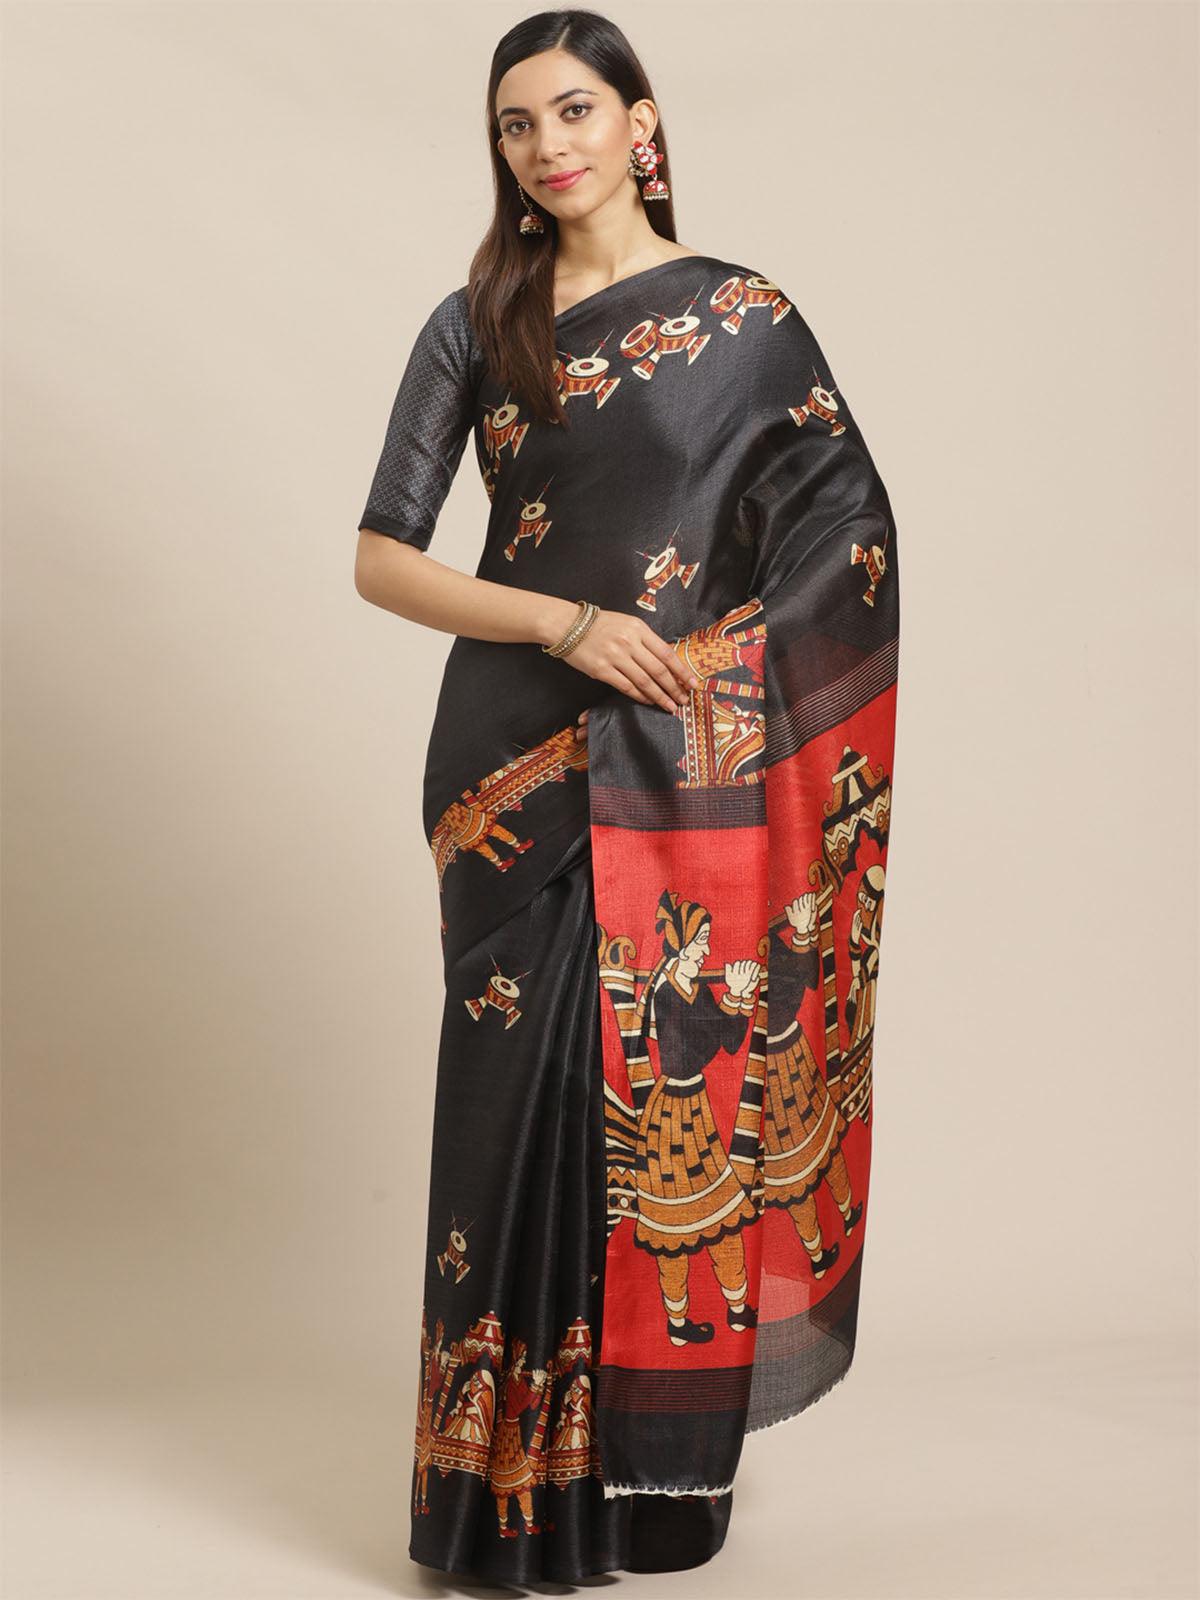 Women's Black Casual Bhagalpuri Printed Saree With Unstitched Blouse - Odette